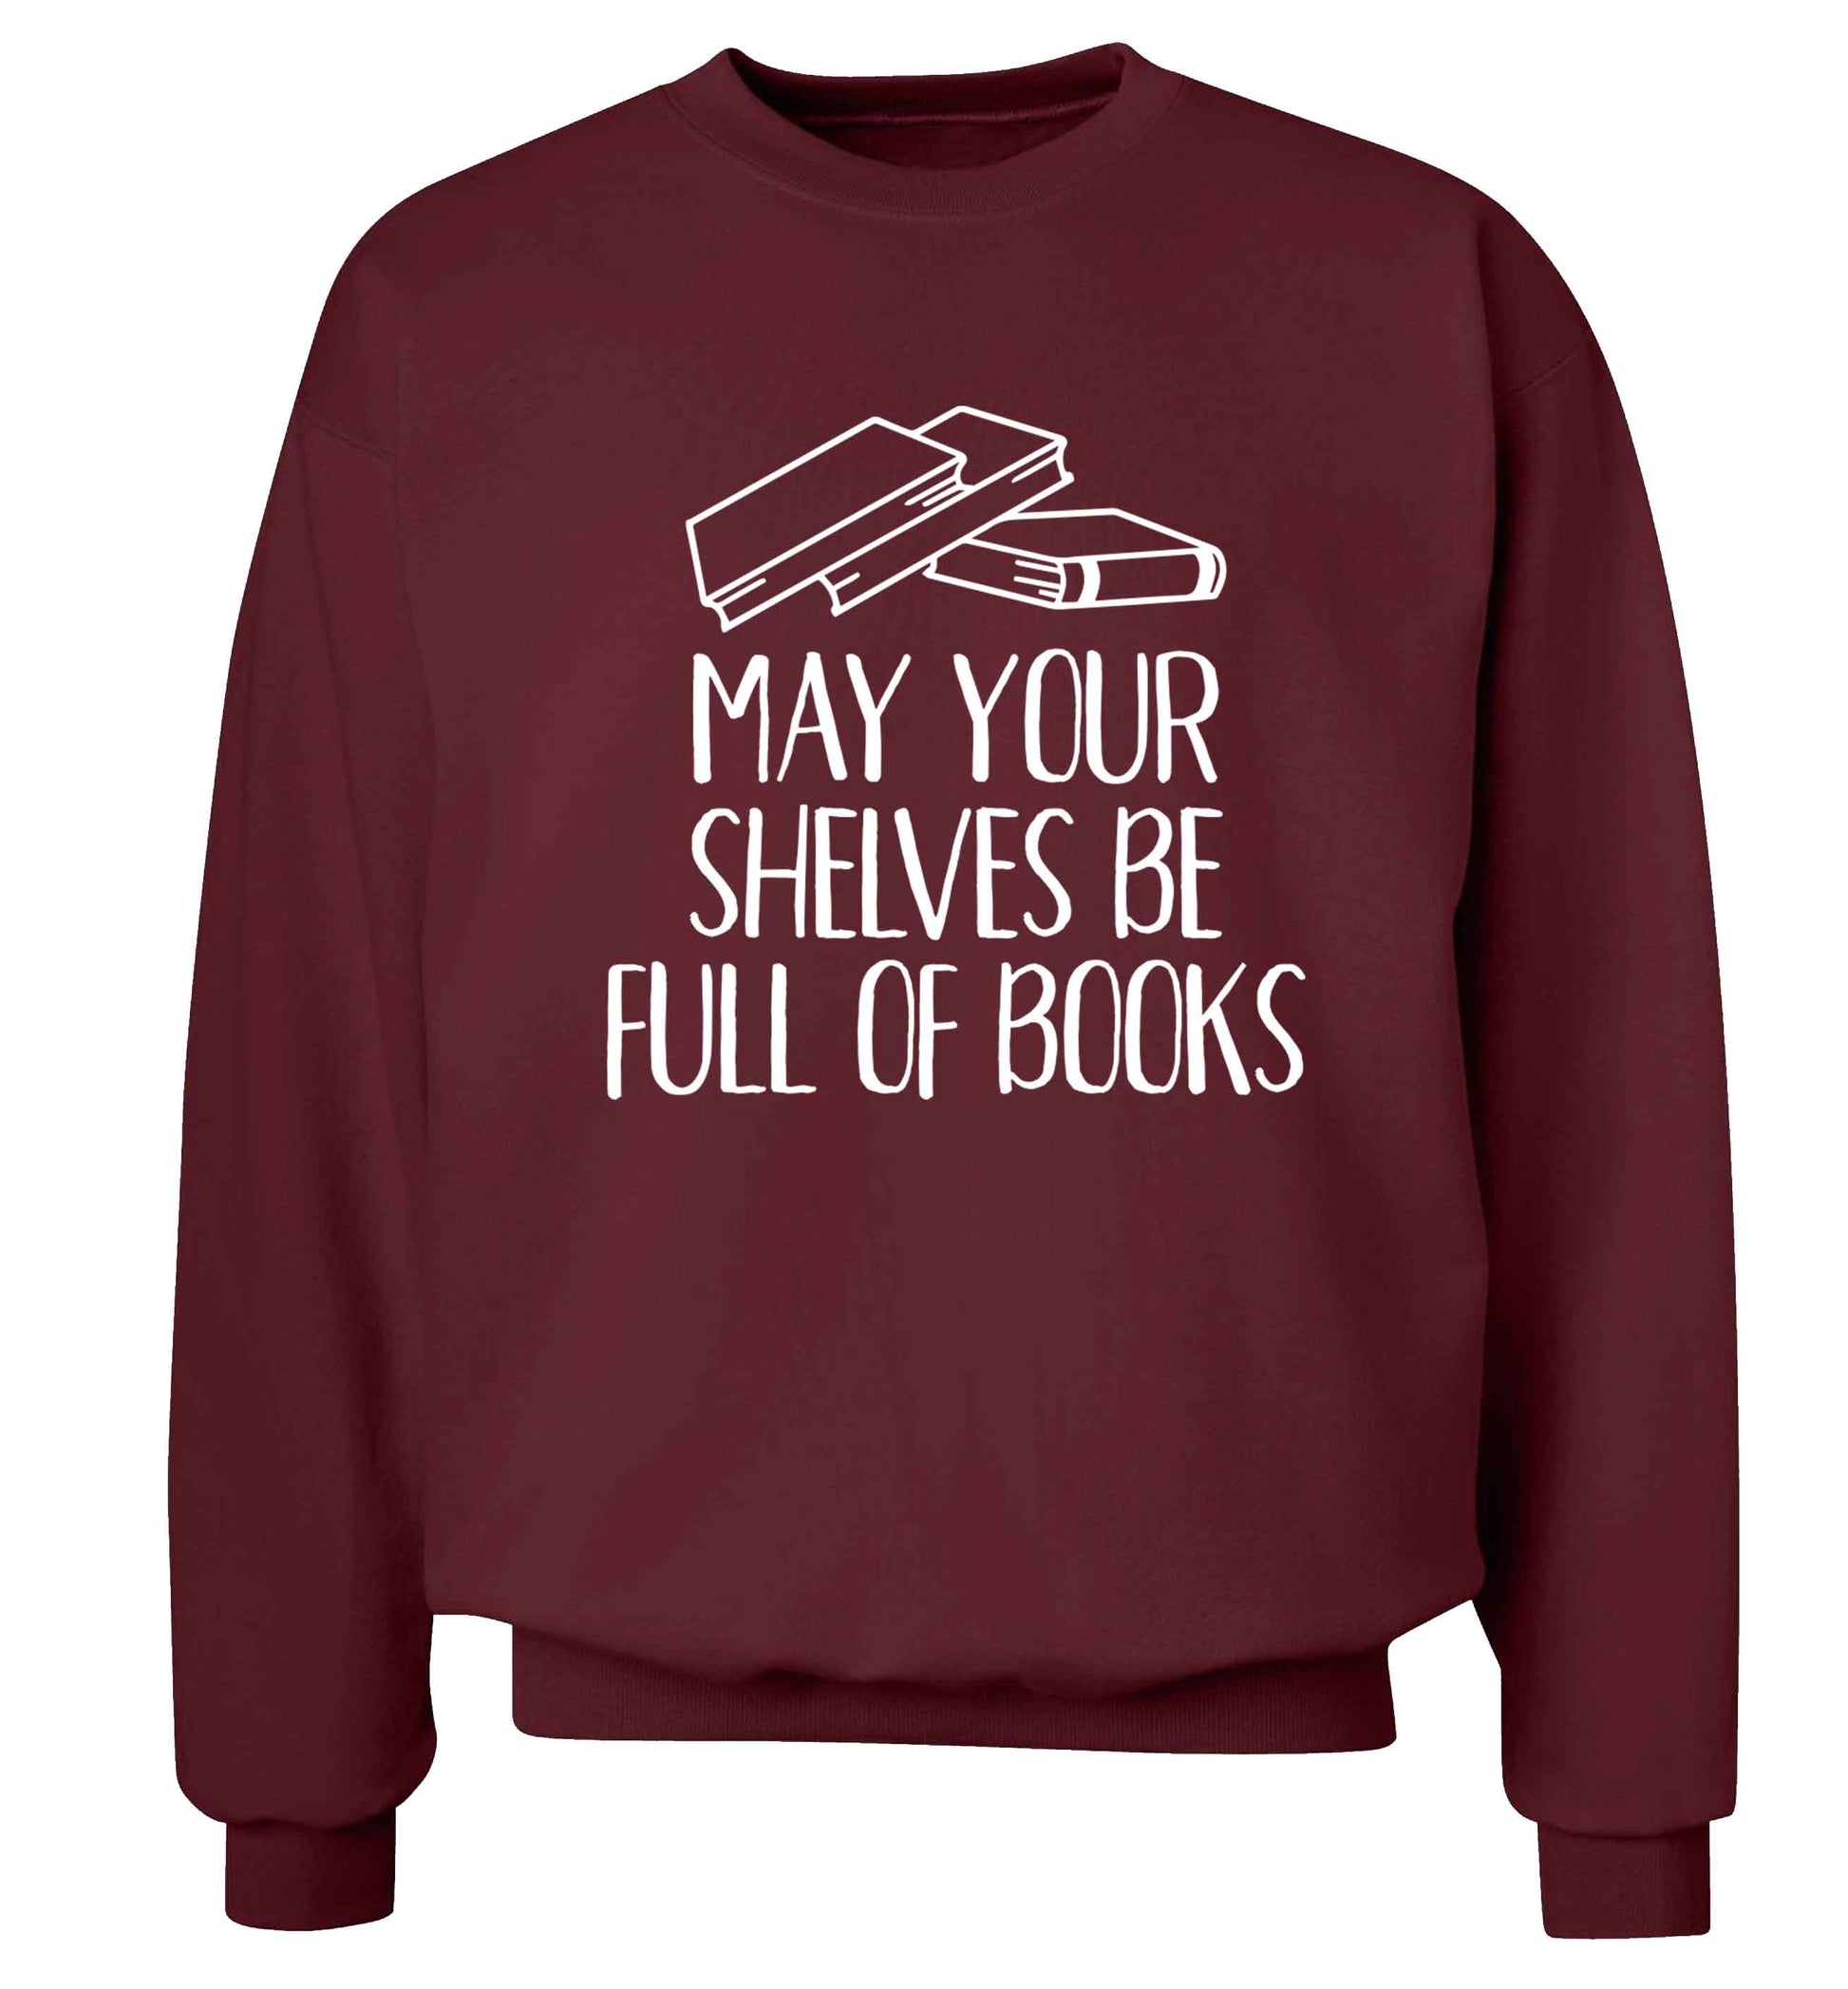 May your shelves be full of books Adult's unisex maroon Sweater 2XL